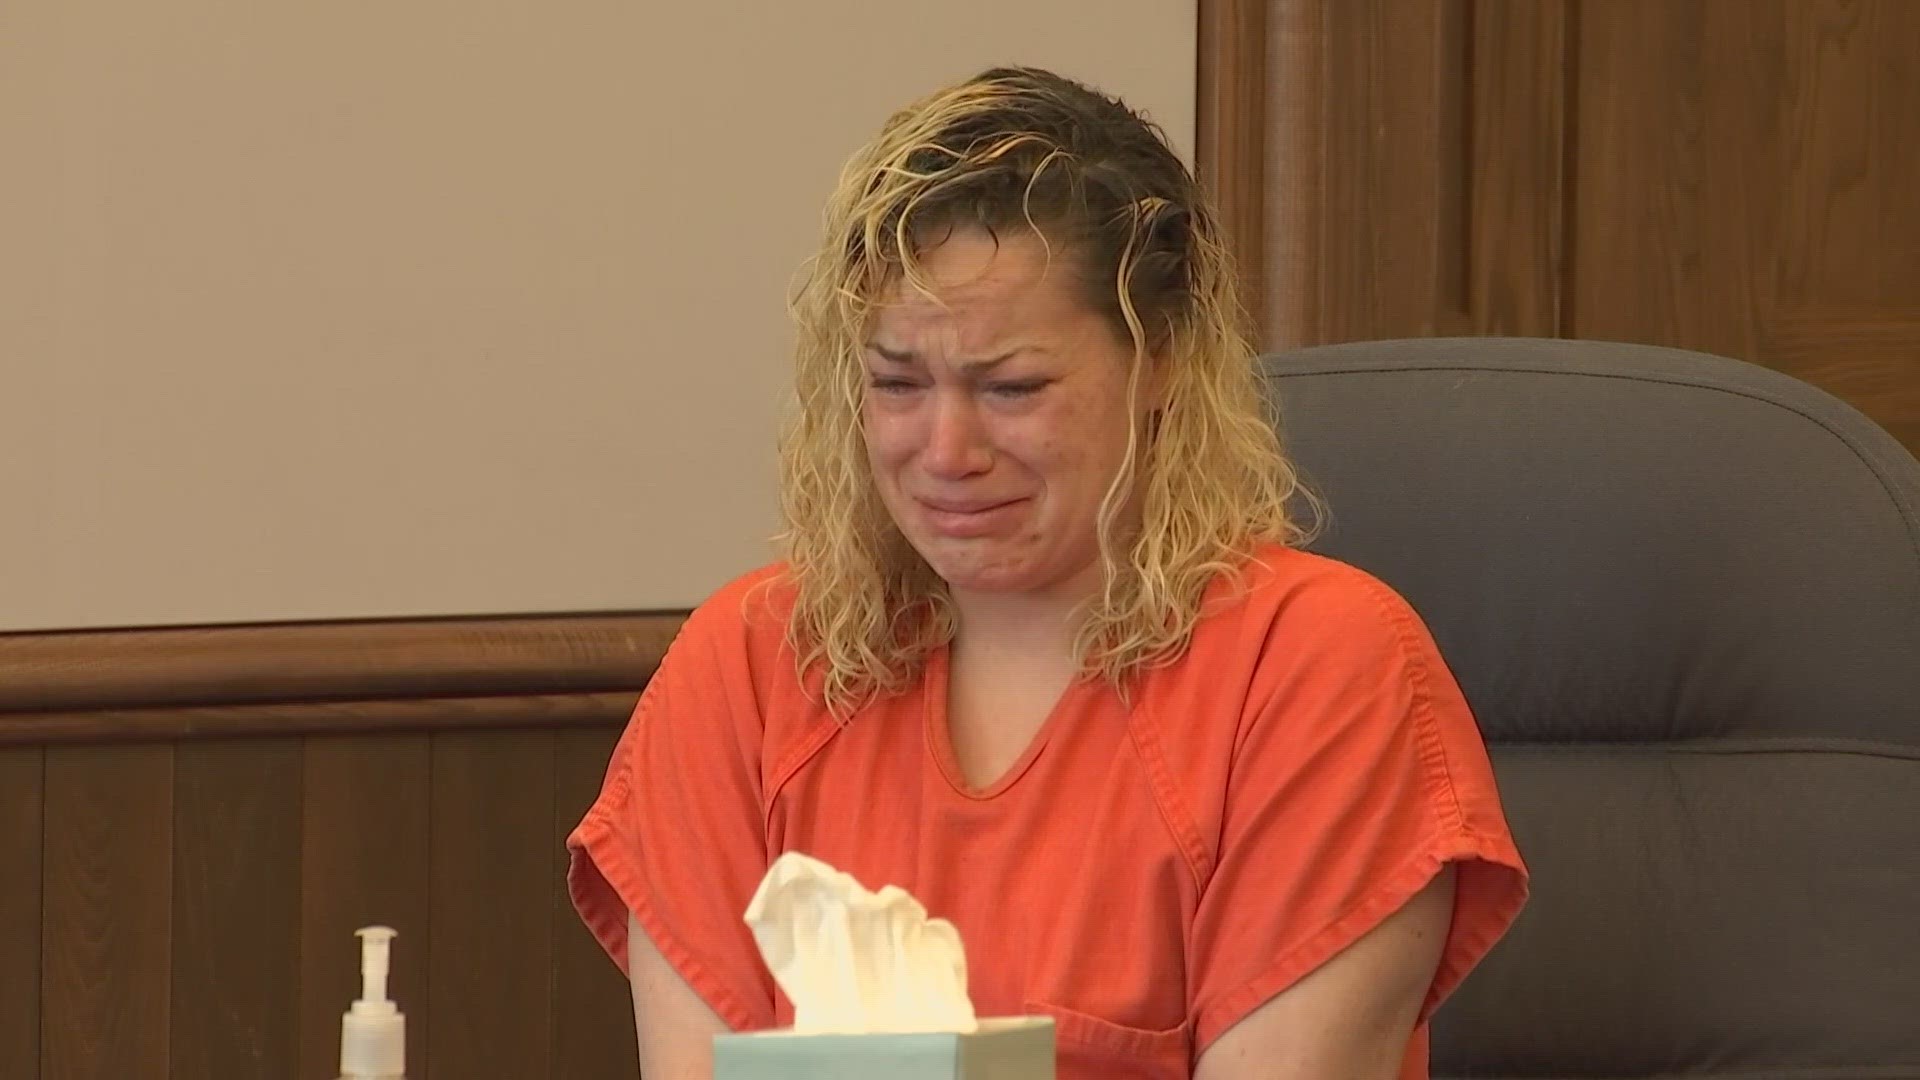 A woman pleaded guilty to aggravated vehicular homicide and other charges in a Logan County crash that killed a 17-year-old girl earlier this year.